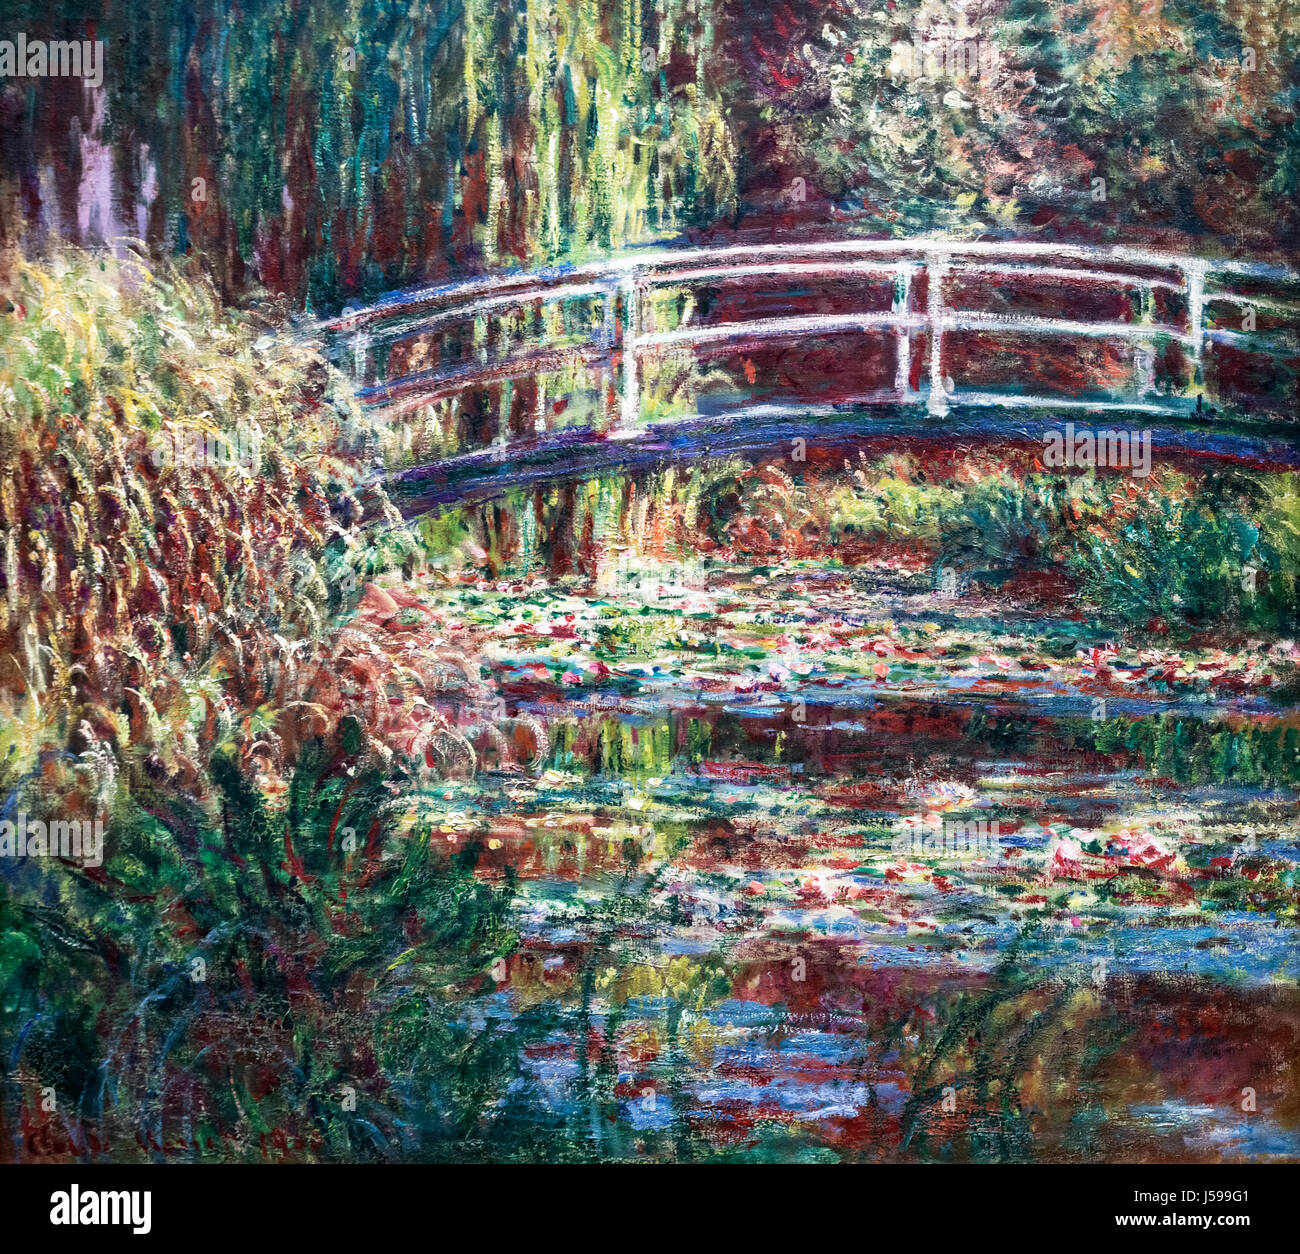 Monet. Painting entitled 'Le Bassin aux Nympheas, Harmonie Rose'(Water Lily Pond, Pink Harmony)  by Claude Monet (1840-1926), oil on canvas, 1900 Stock Photo